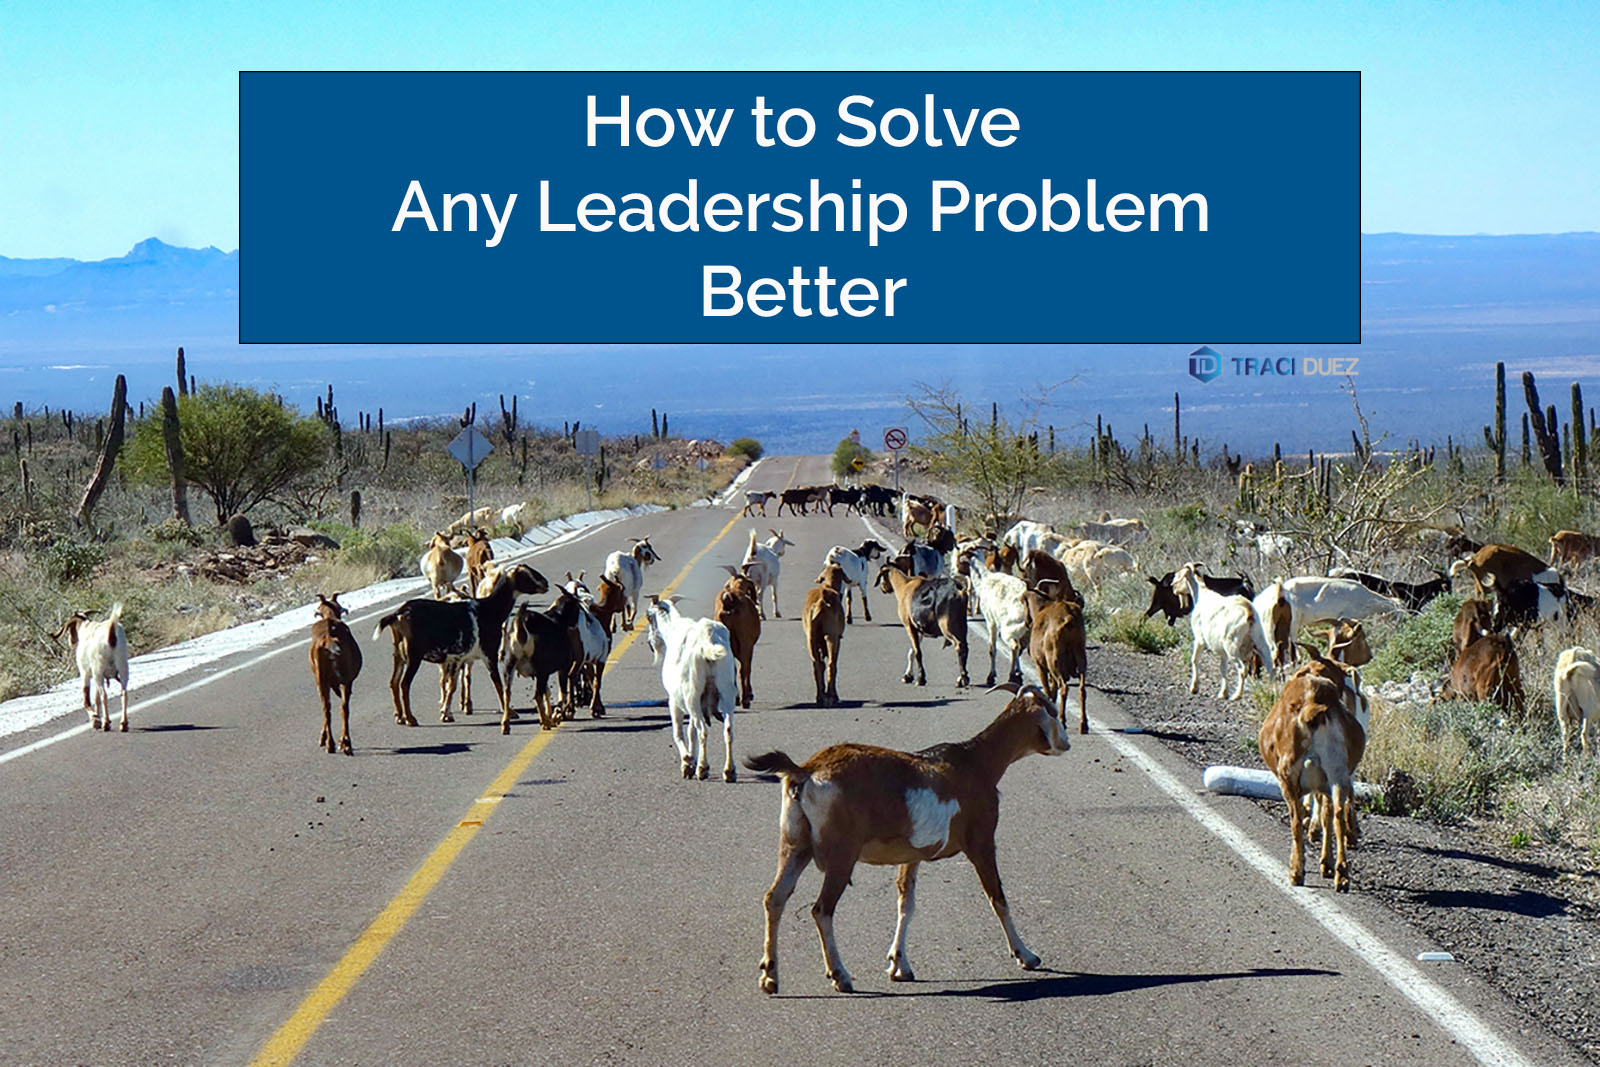 How to Solve Any Leadership Problem Better